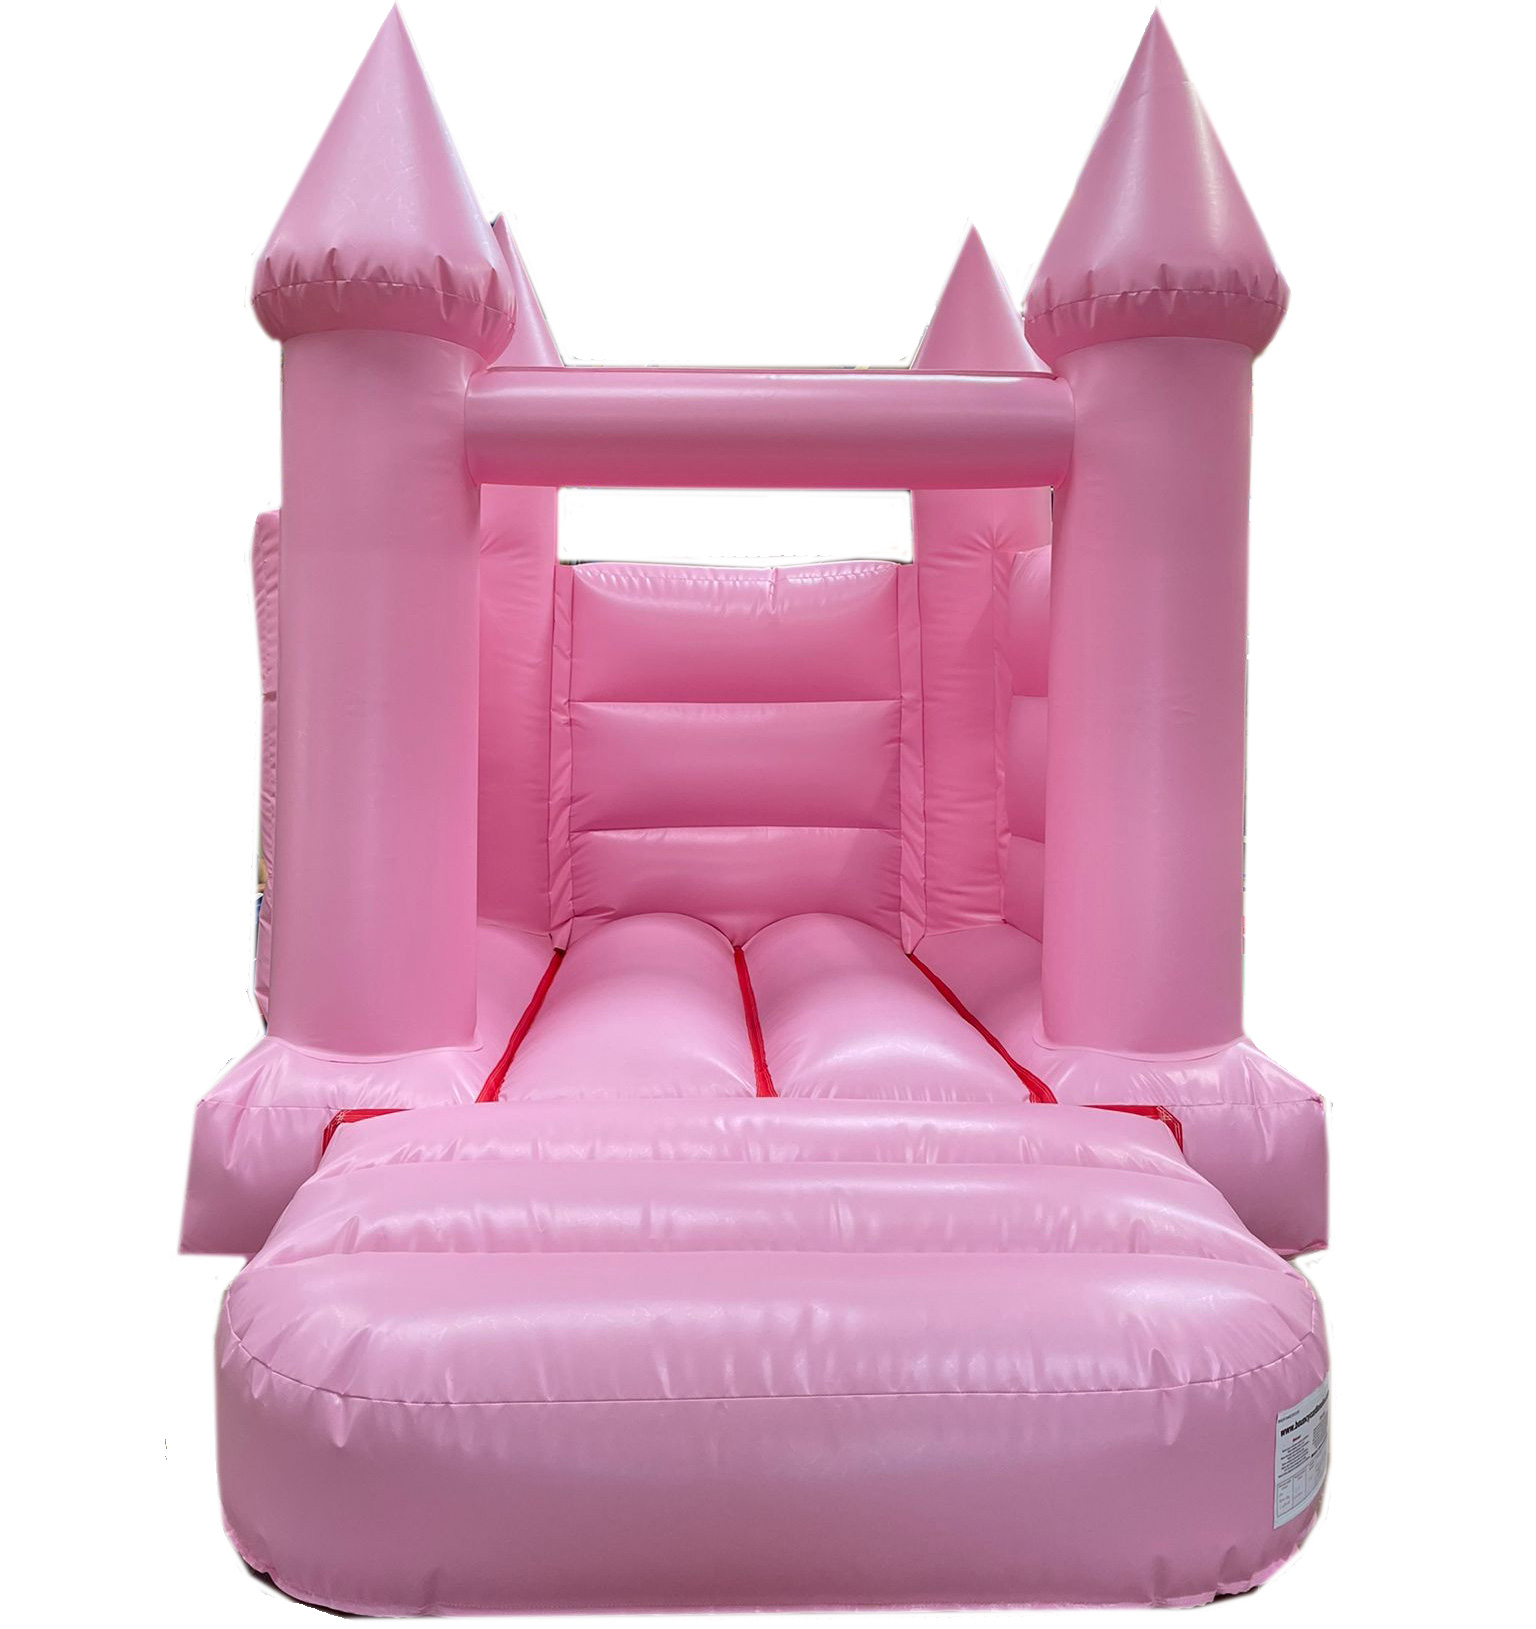 Bouncy Castle Sales - BC635 - Bouncy Inflatable for sale